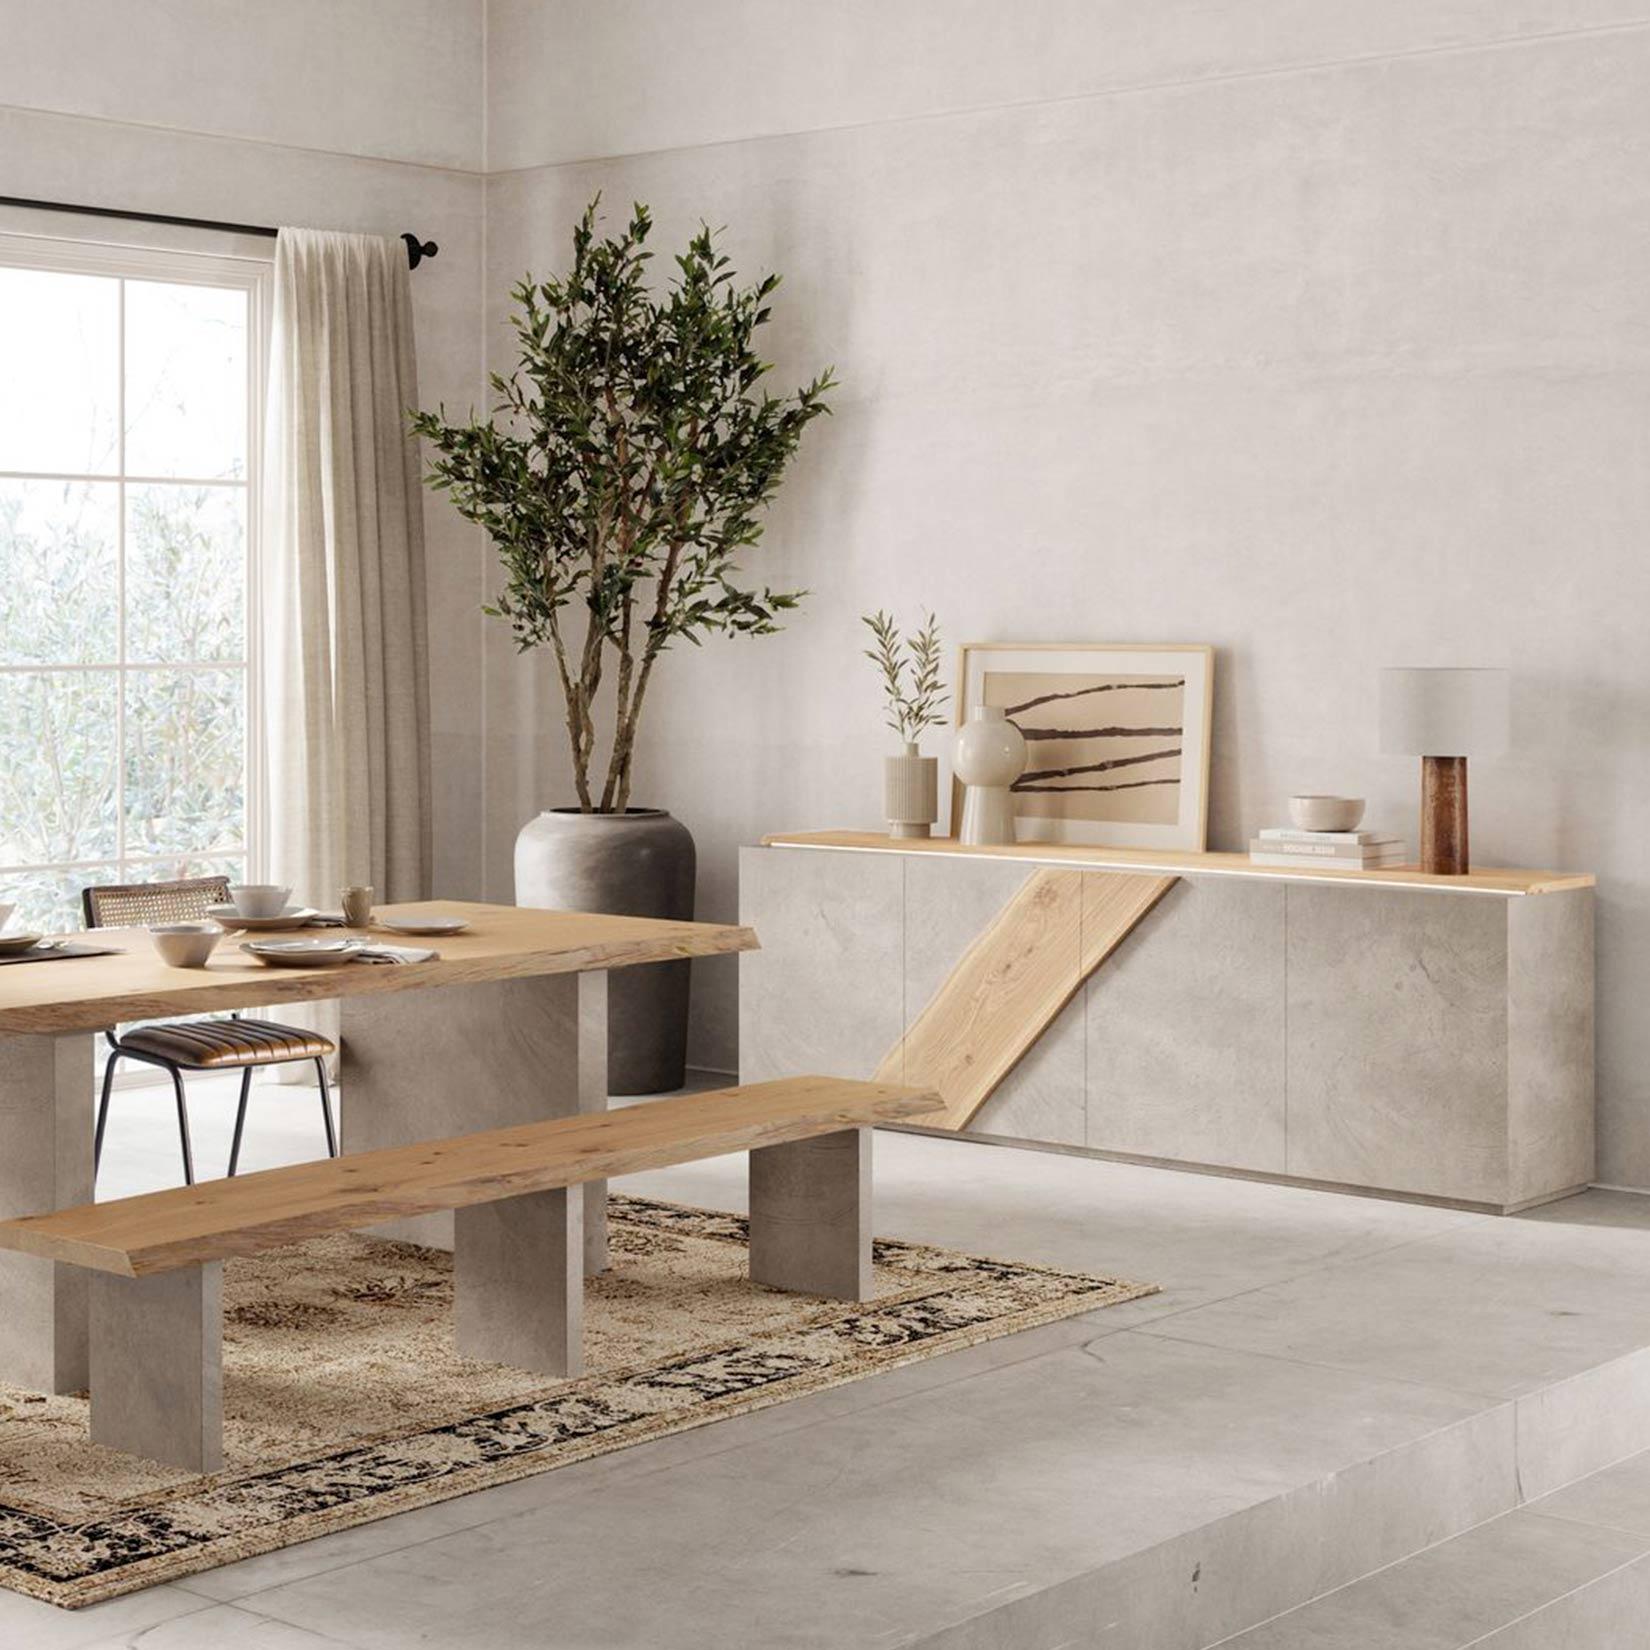 Contemporary Woodland Sideboard 180cm w/ 3 doors and 1 inner drawer - Concrete Finishing For Sale